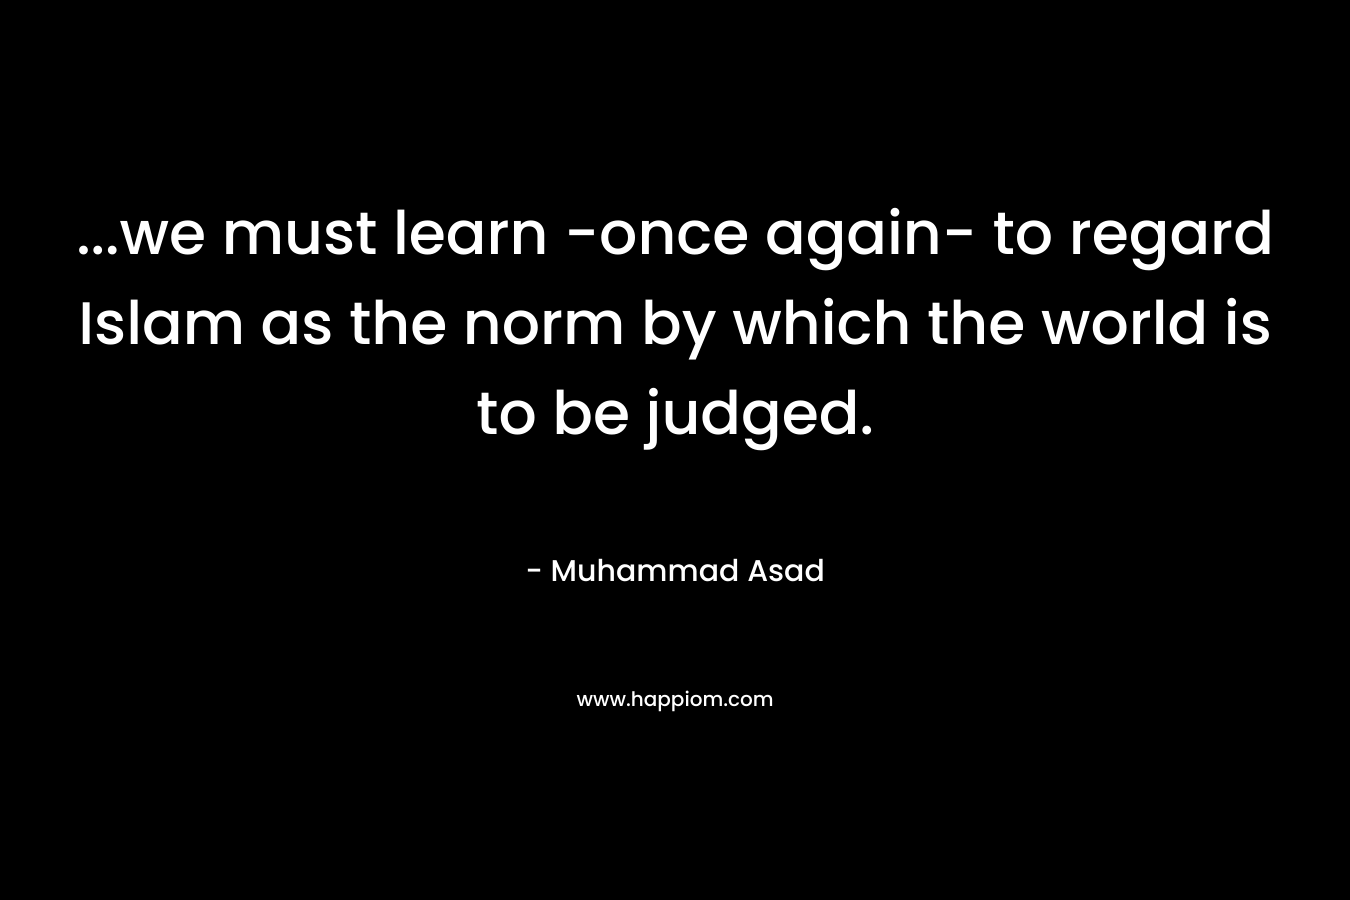 ...we must learn -once again- to regard Islam as the norm by which the world is to be judged.